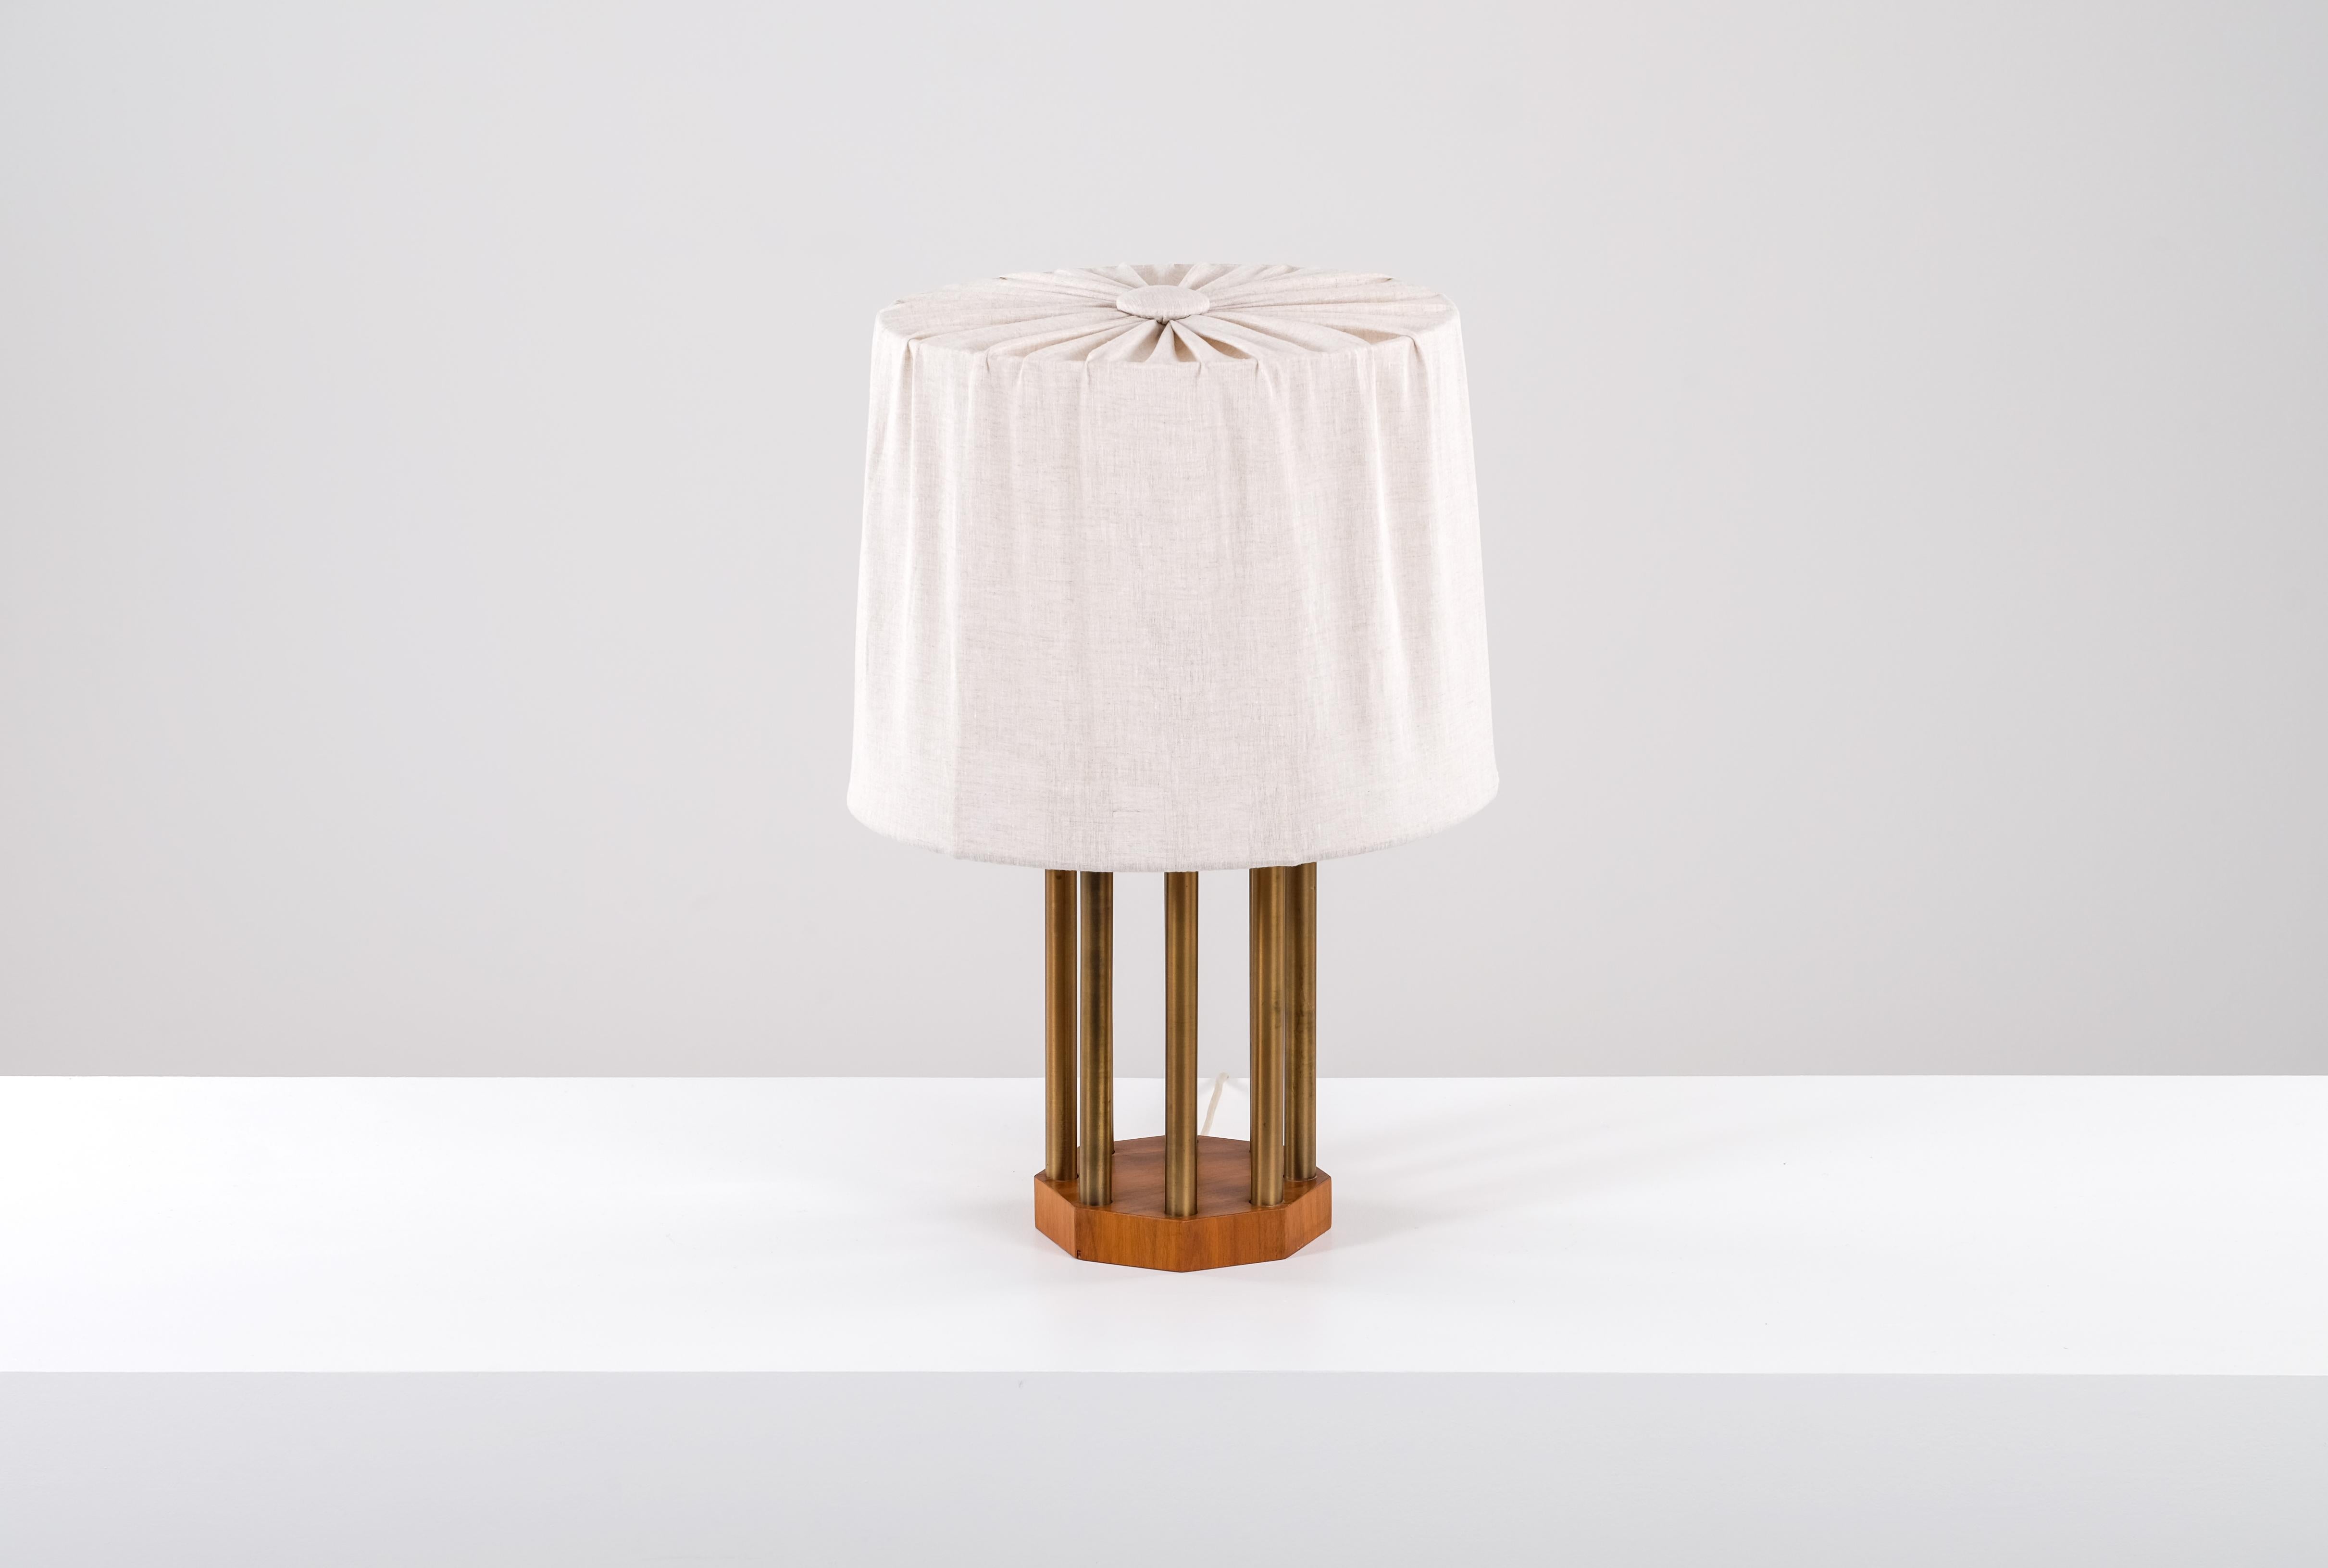 Rare Swedish Brass Table Lamp, 1950s For Sale 4